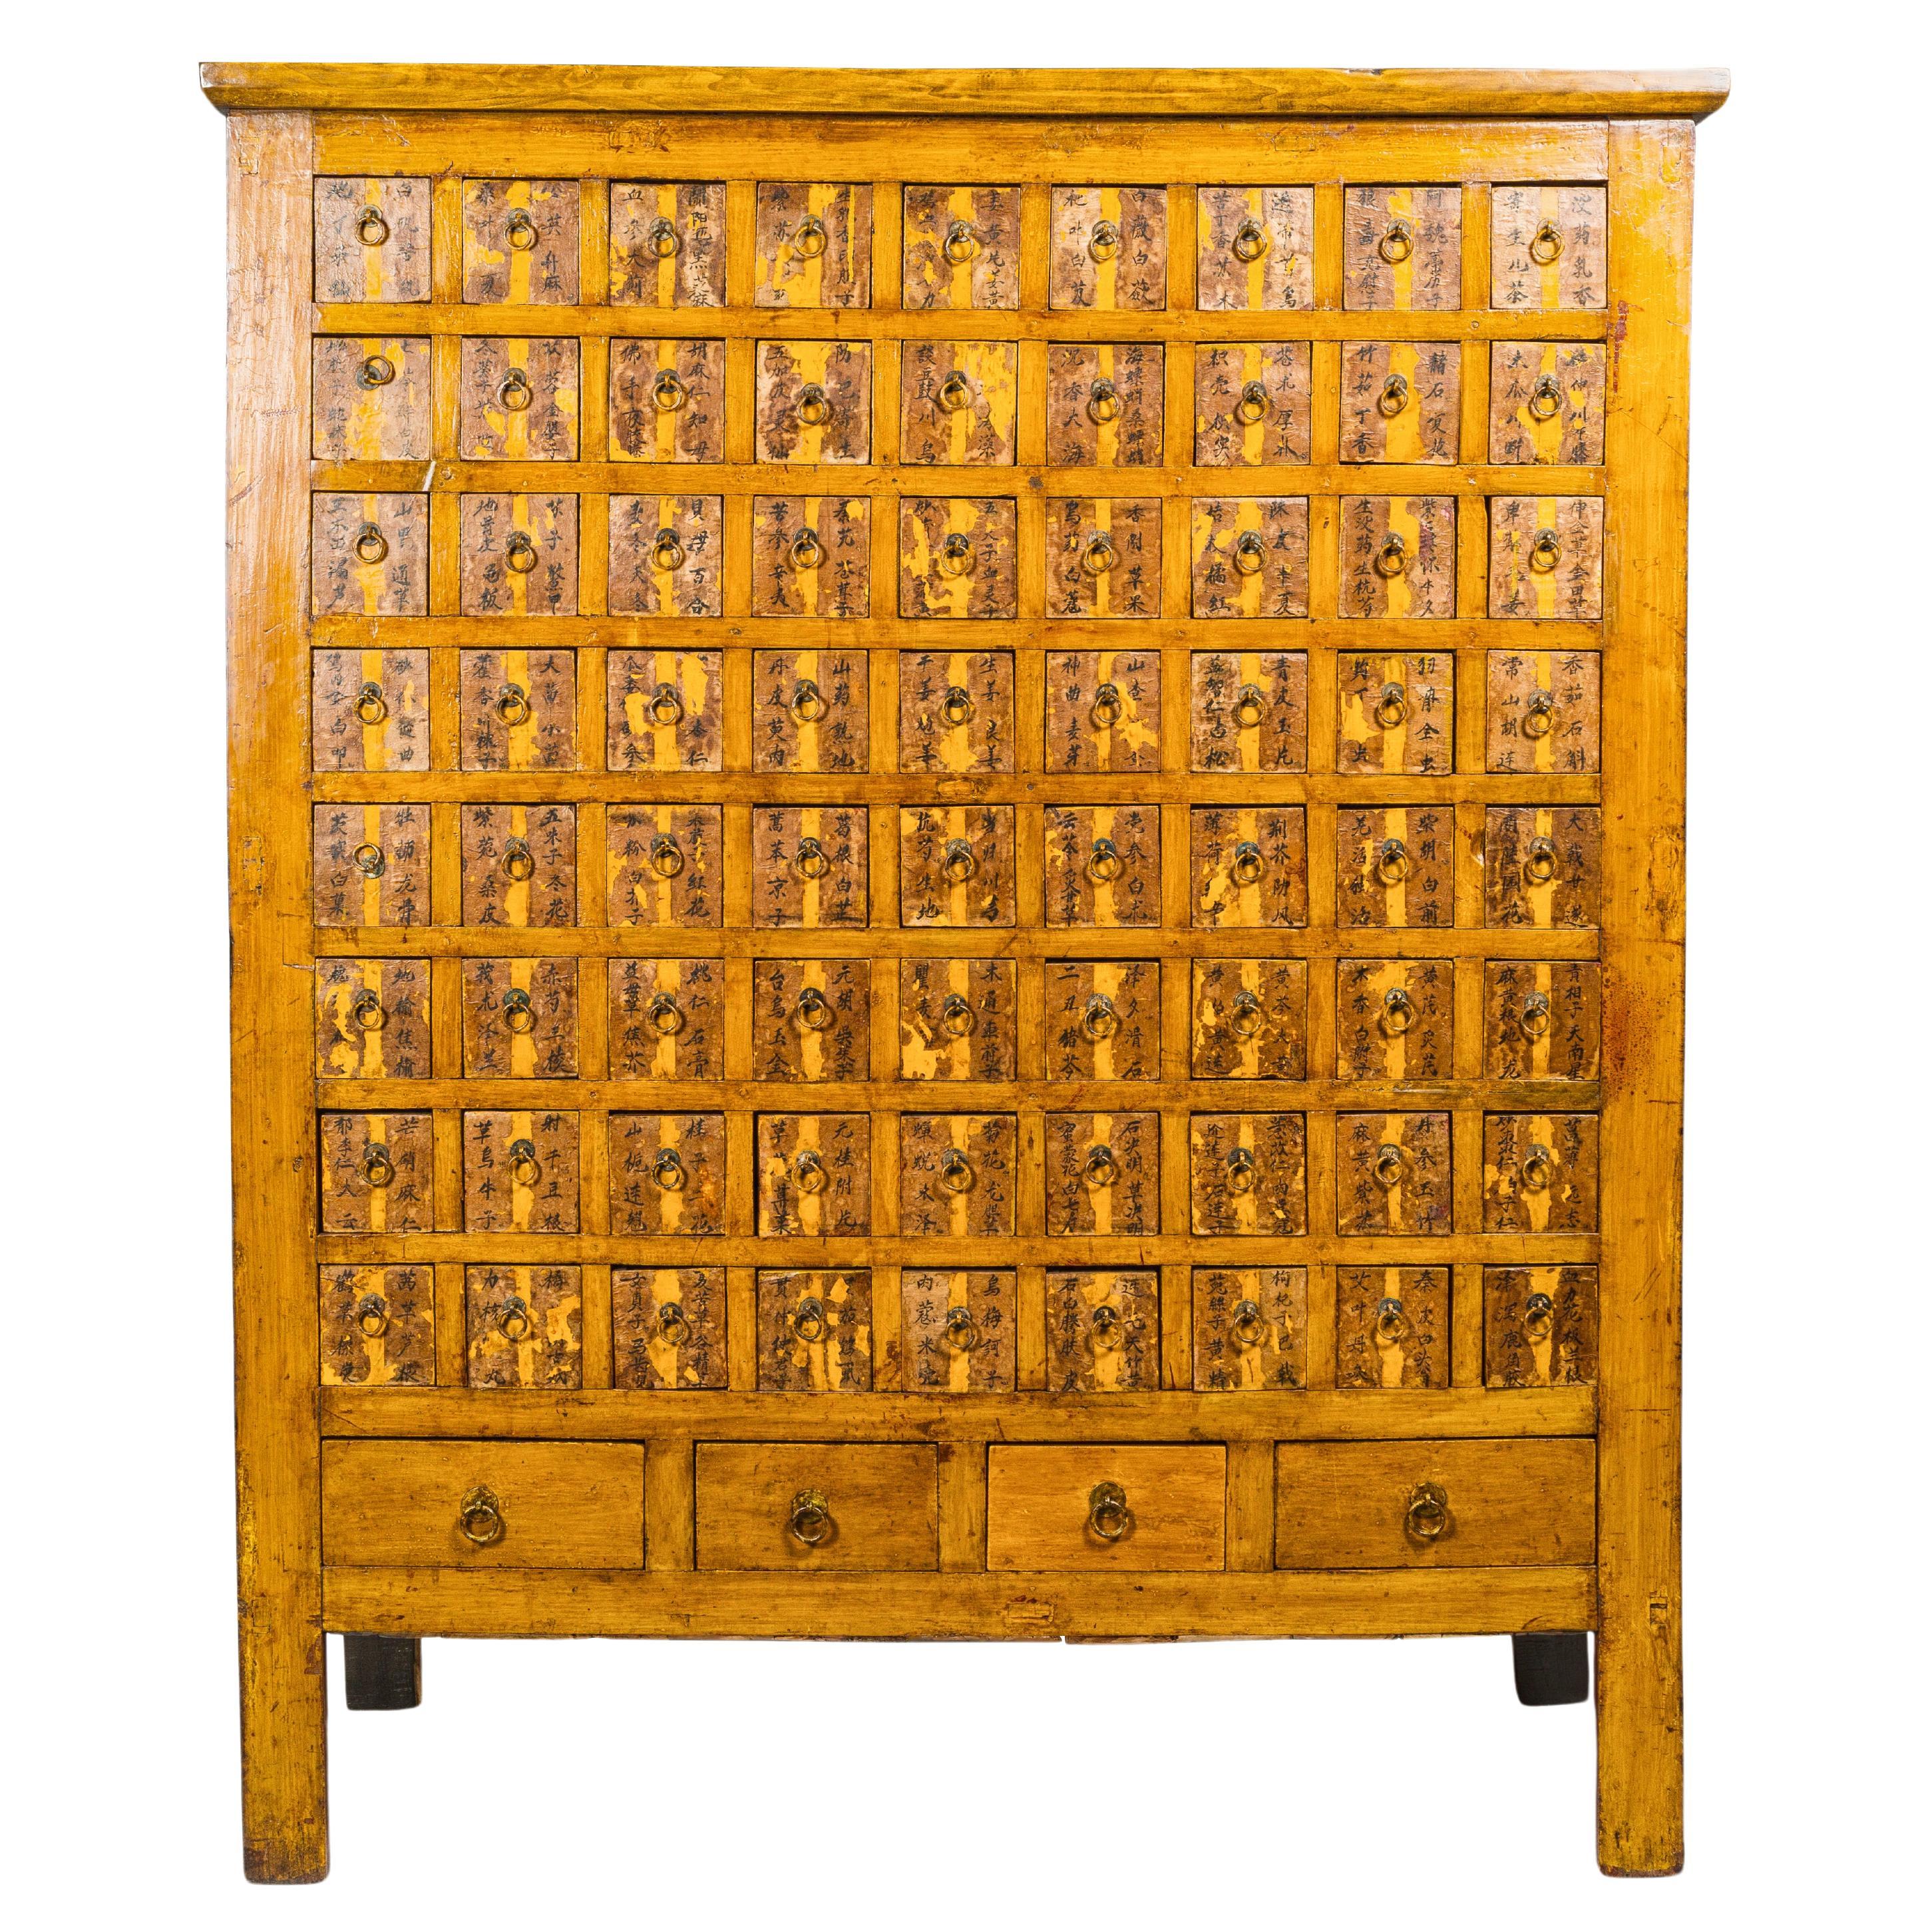 Oversized Qing Apothecary Cabinet with 76 Drawers and Chinese Calligraphy